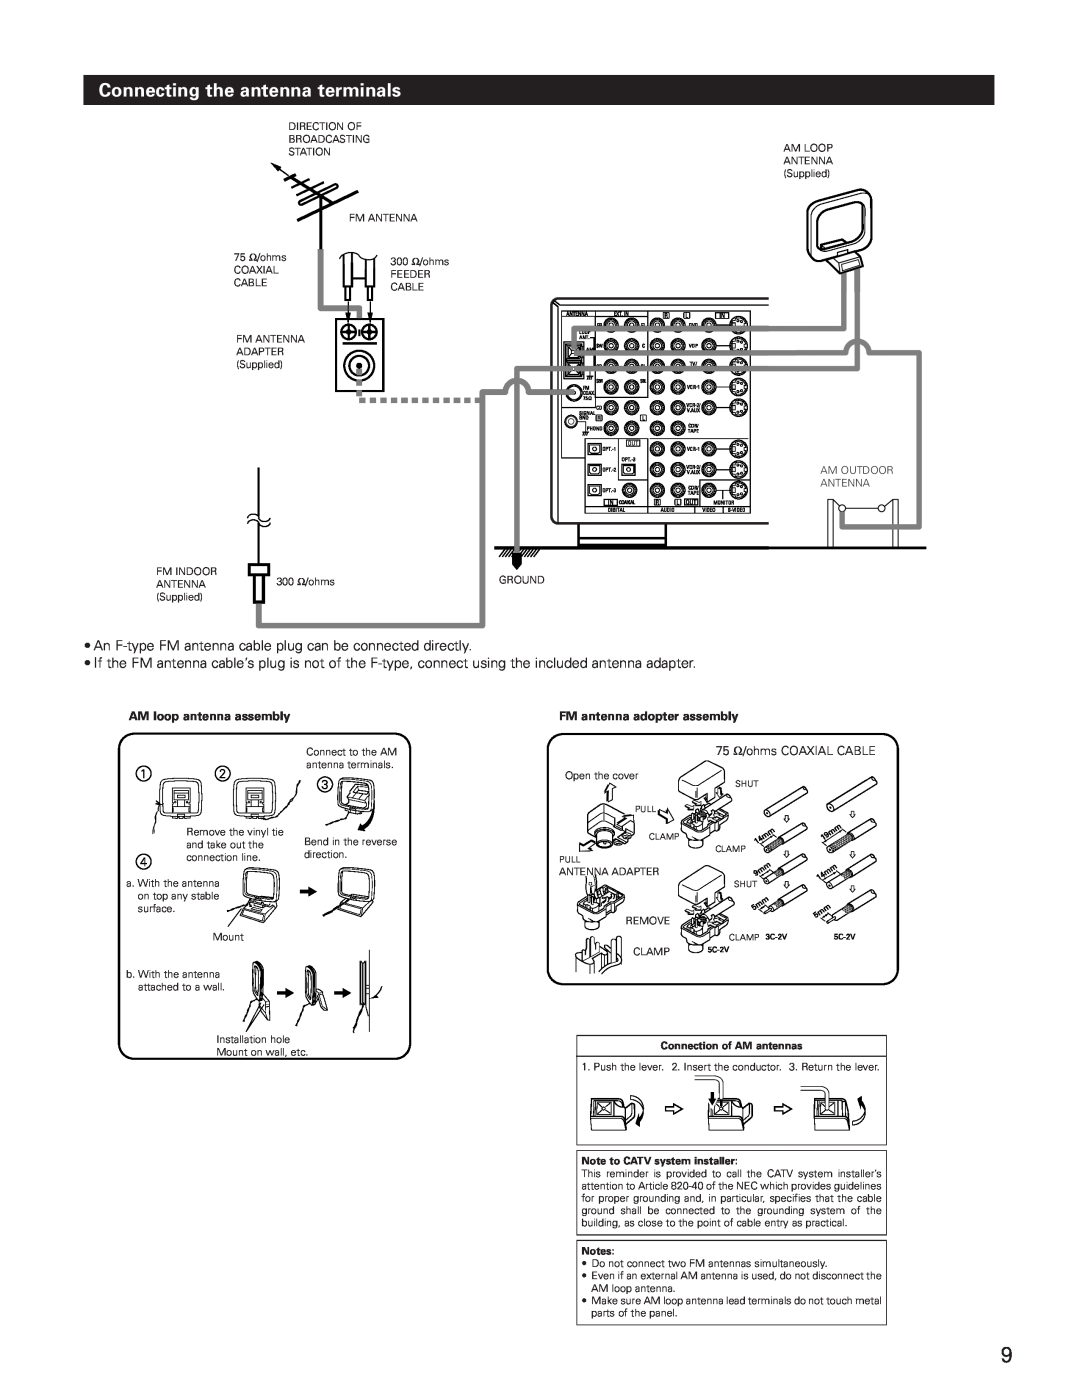 Denon AVR-3801 manual Connecting the antenna terminals, AM loop antenna assembly, FM antenna adopter assembly 